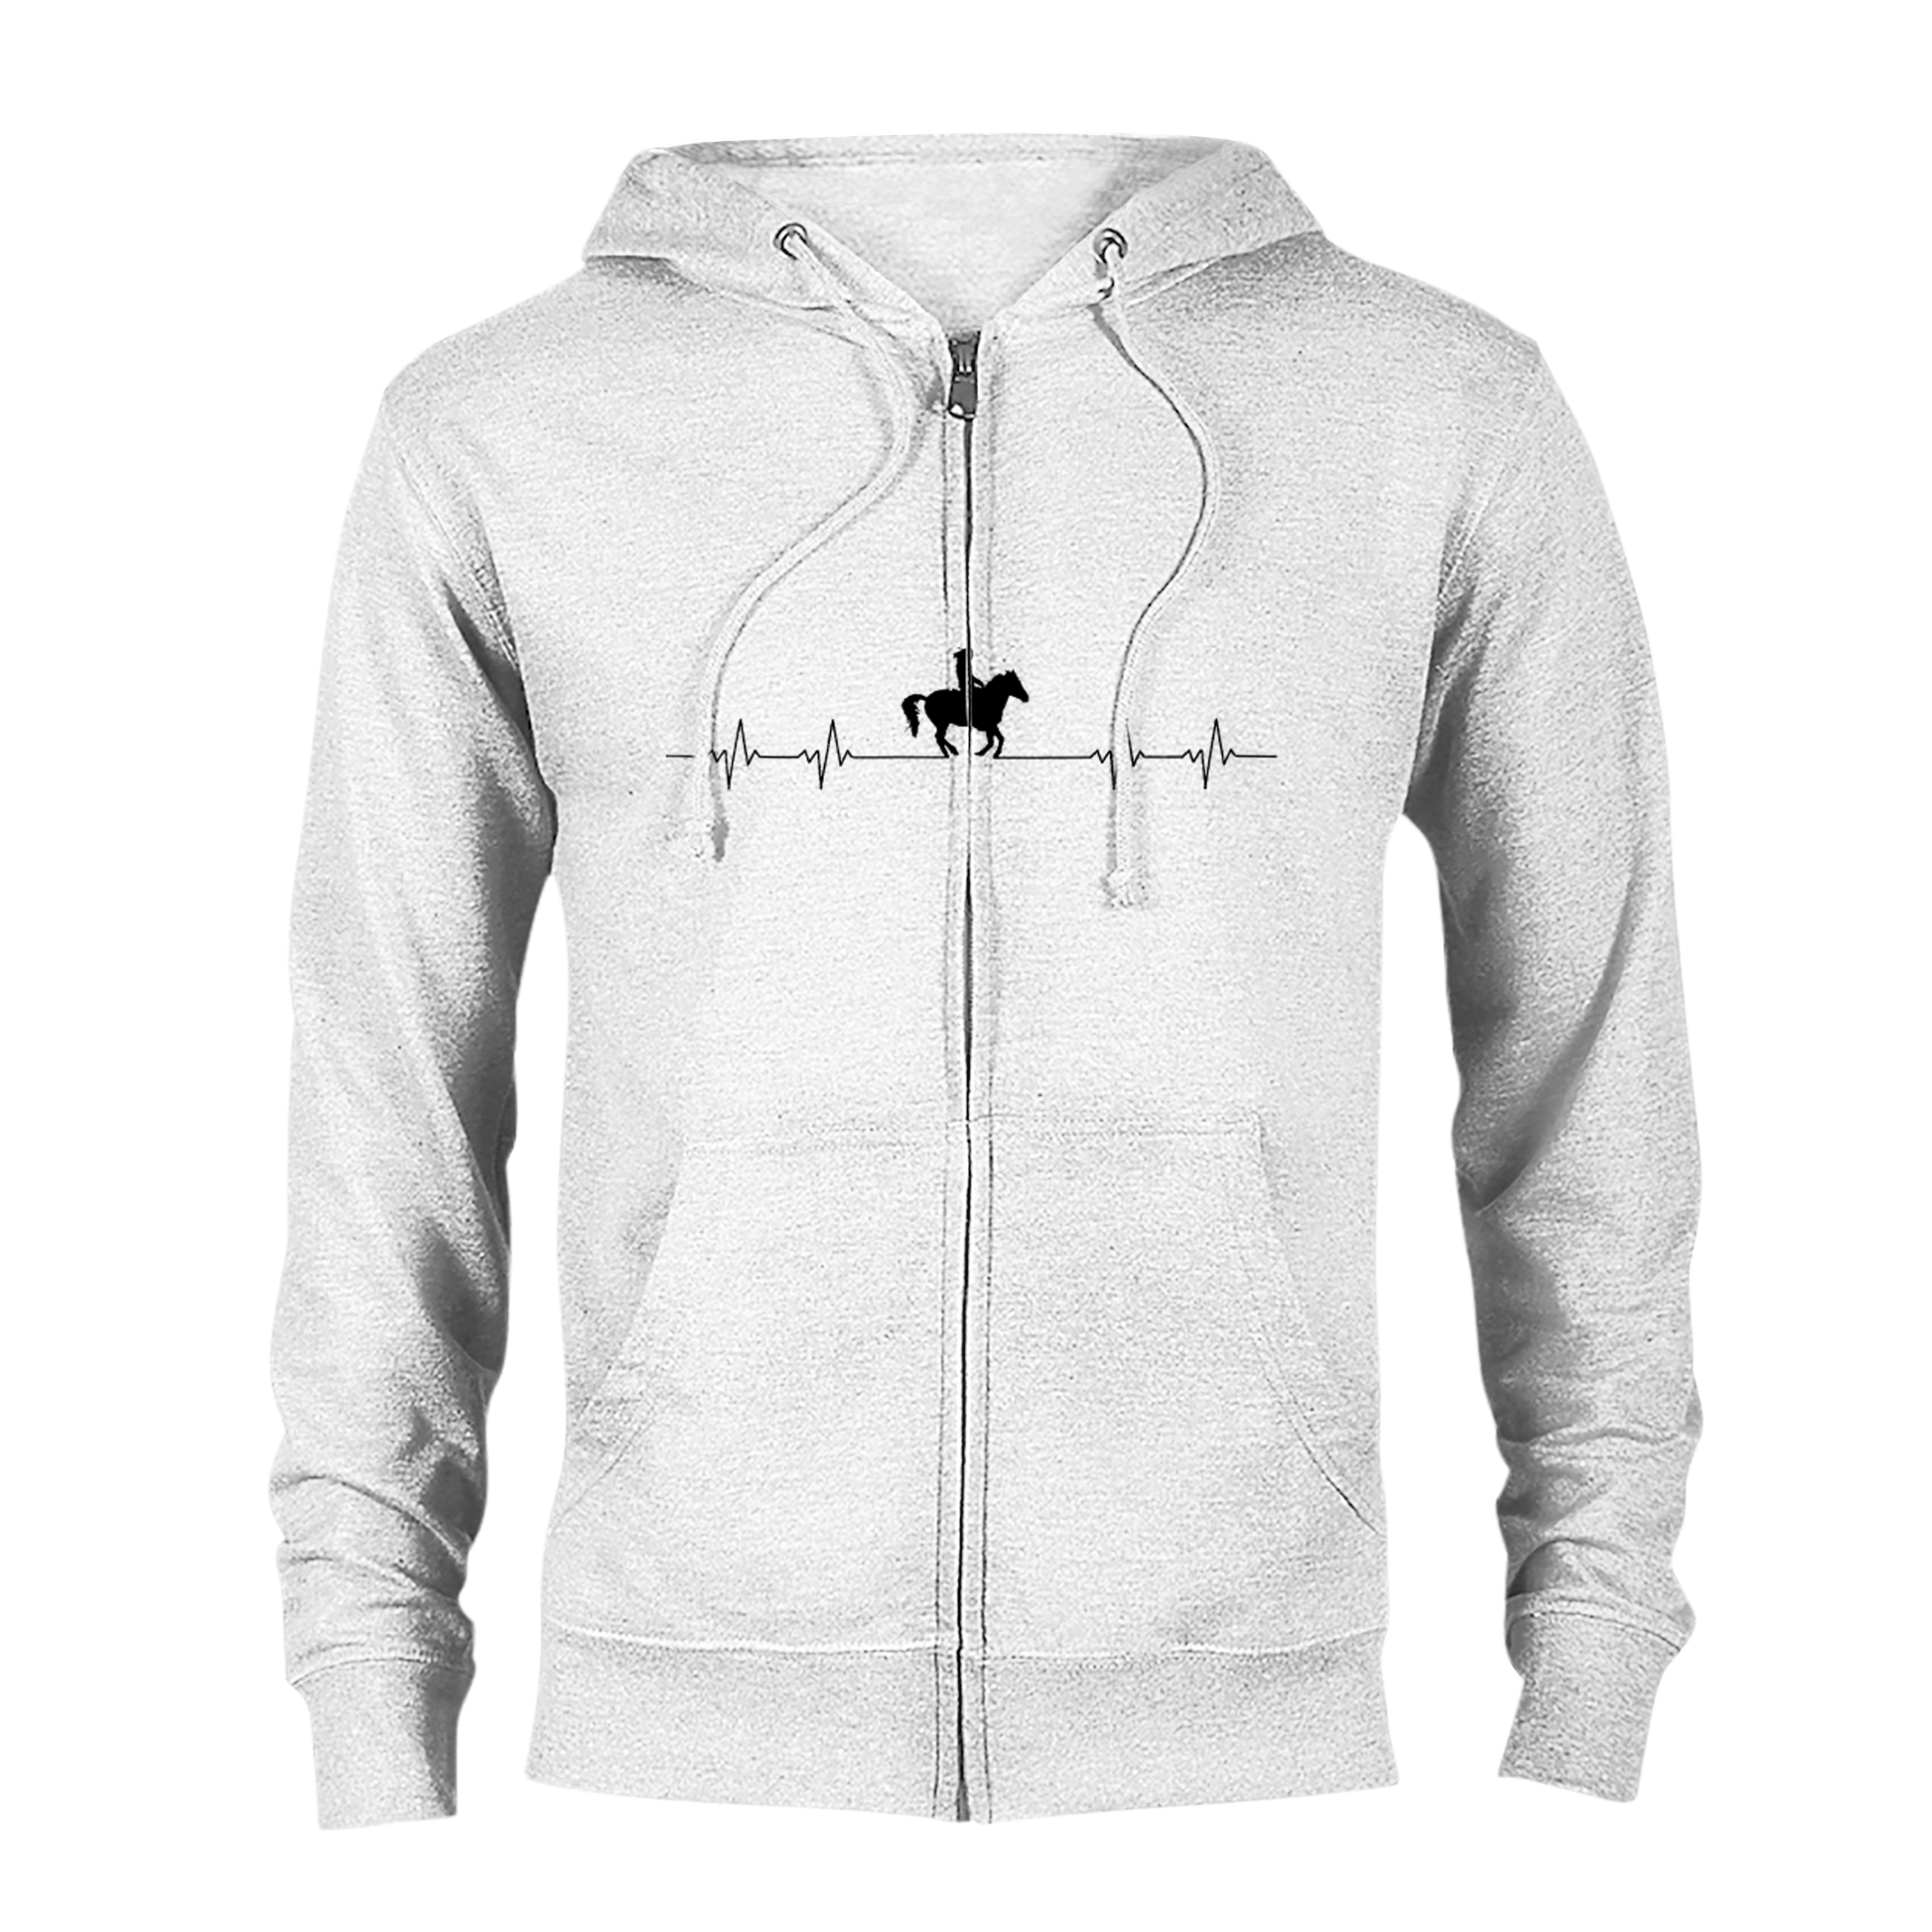 Hand Drawn Horse || Unisex Zip Hoodie - Design: "HEARTBEAT"; Static Design; Personalizable Back Text